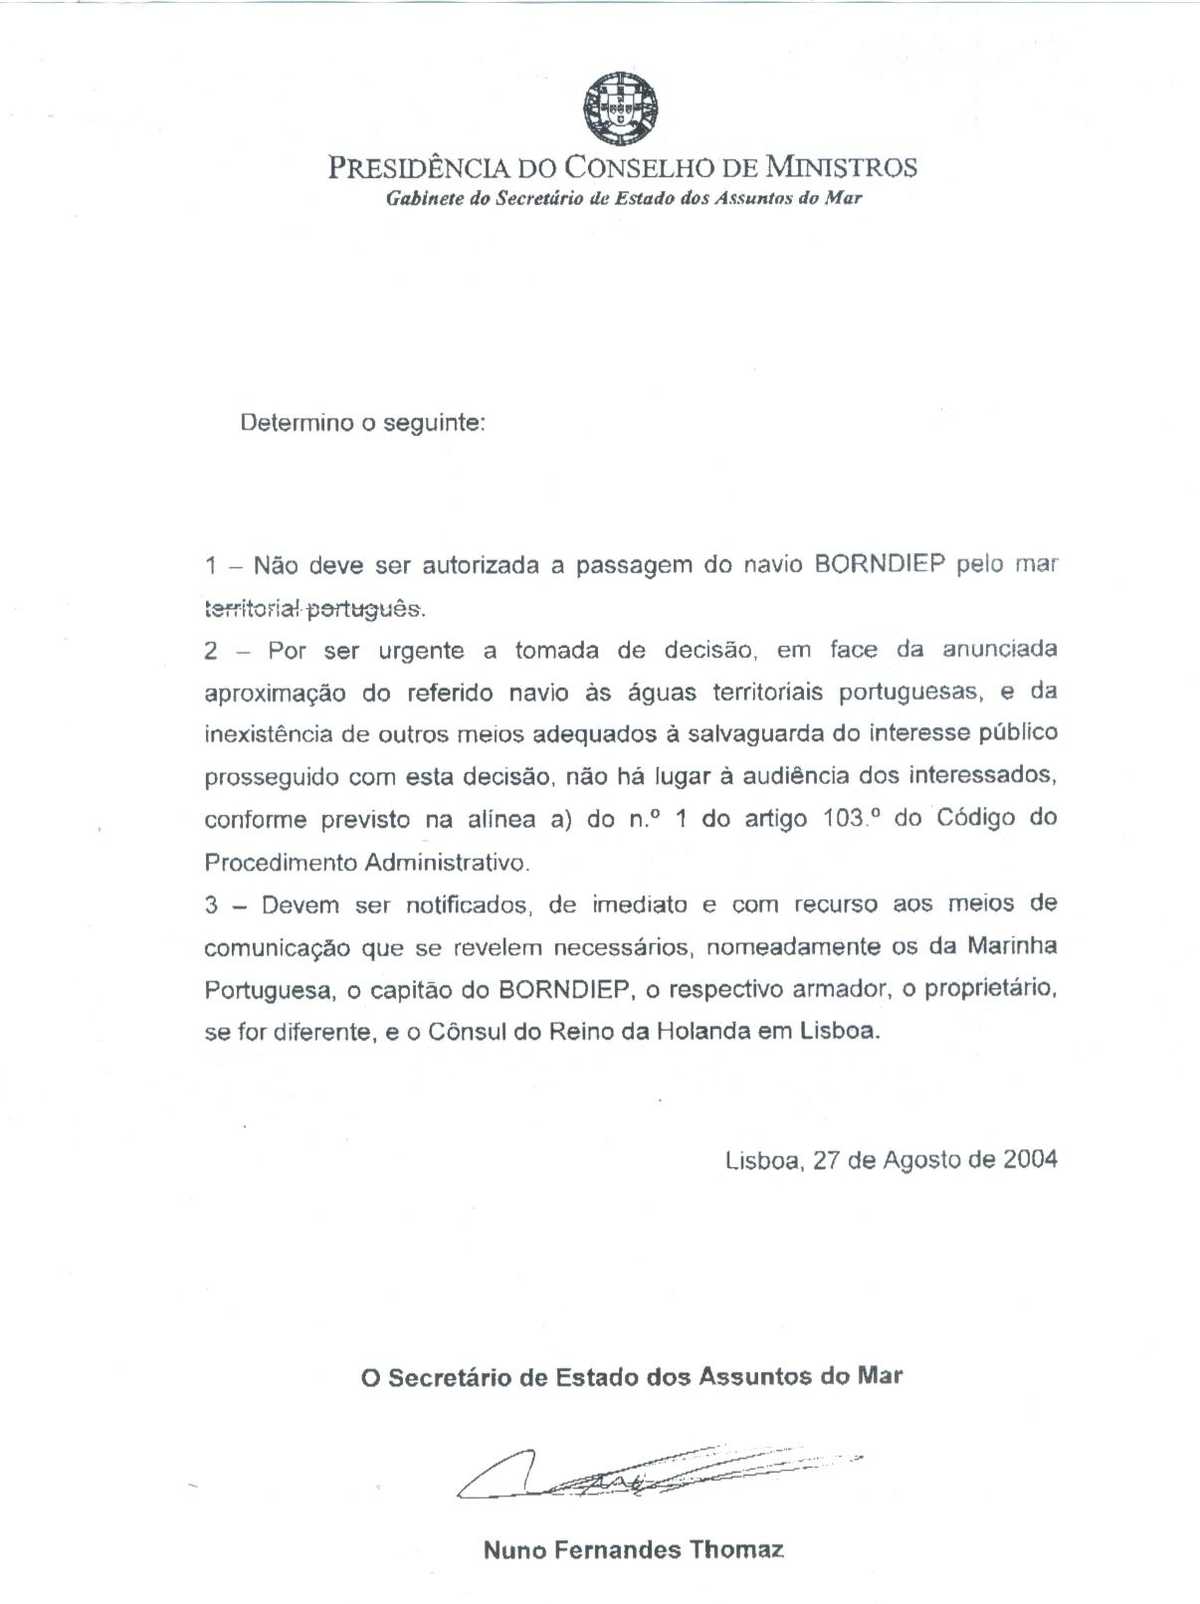 Statement nr. 0010/SEAM/2004 from the Presidency of the Council of Ministers of Portugal. Page 3